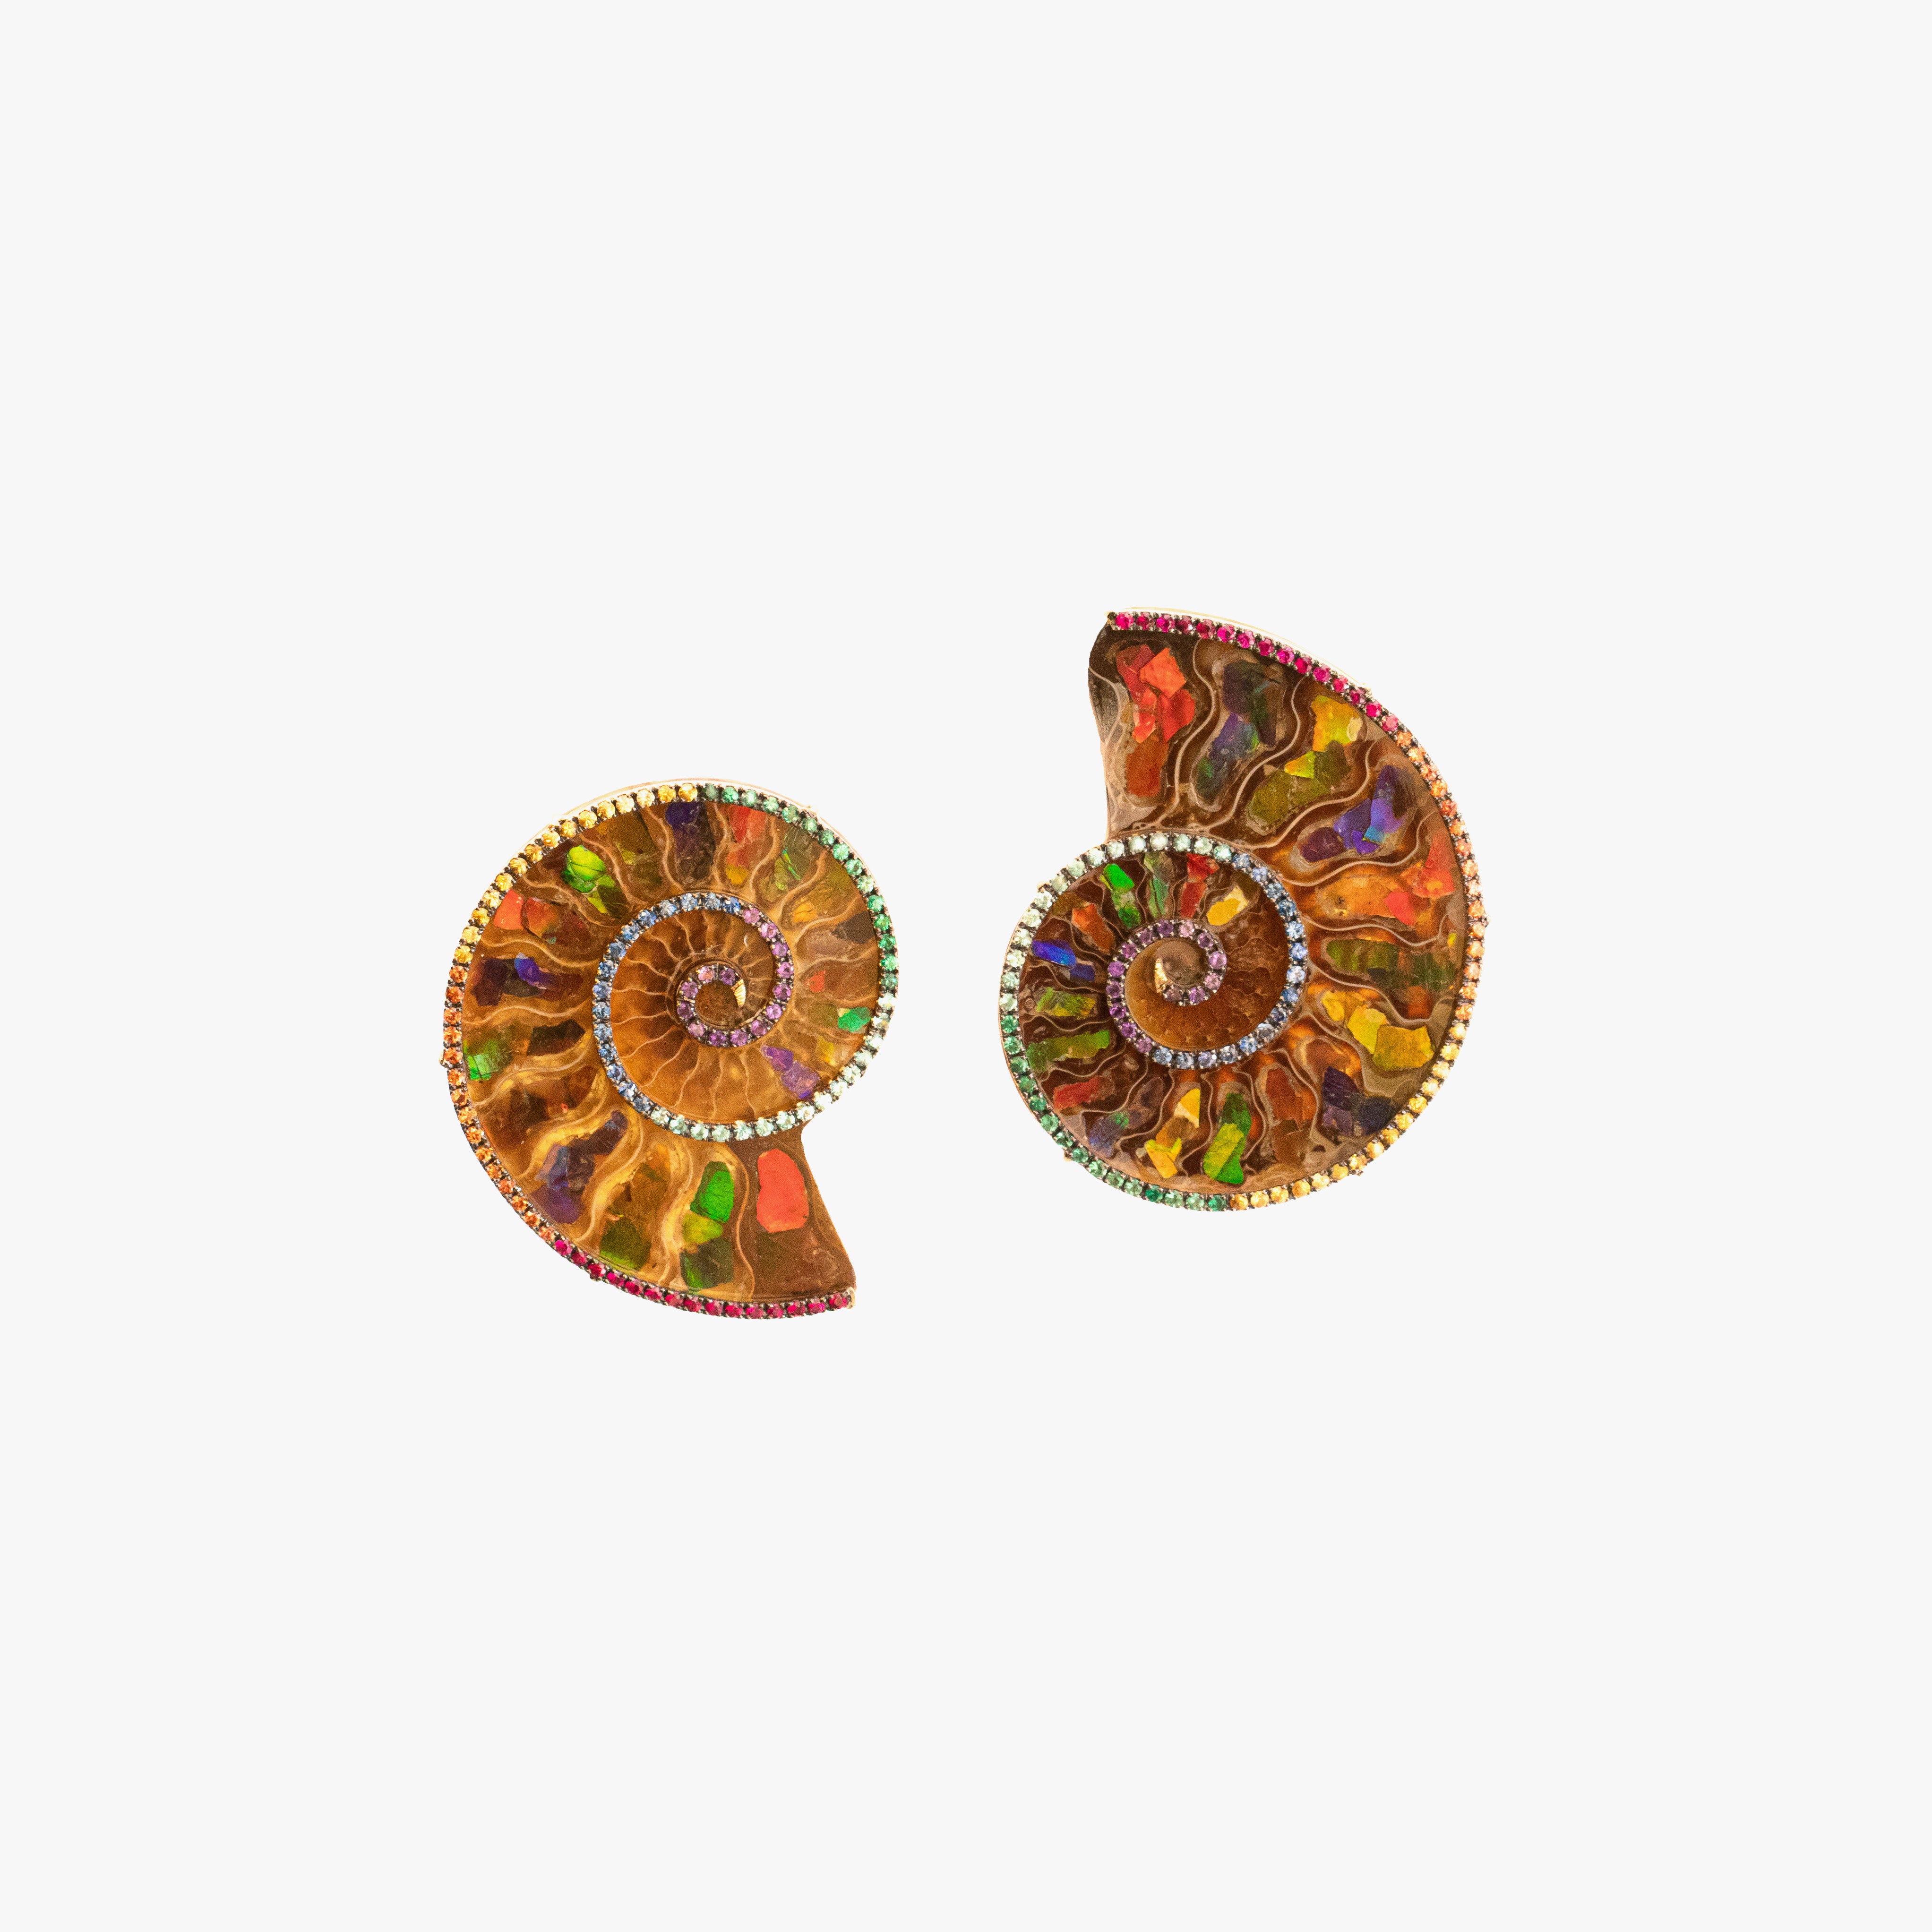 Earrings with Ammonite Fossil Inlay